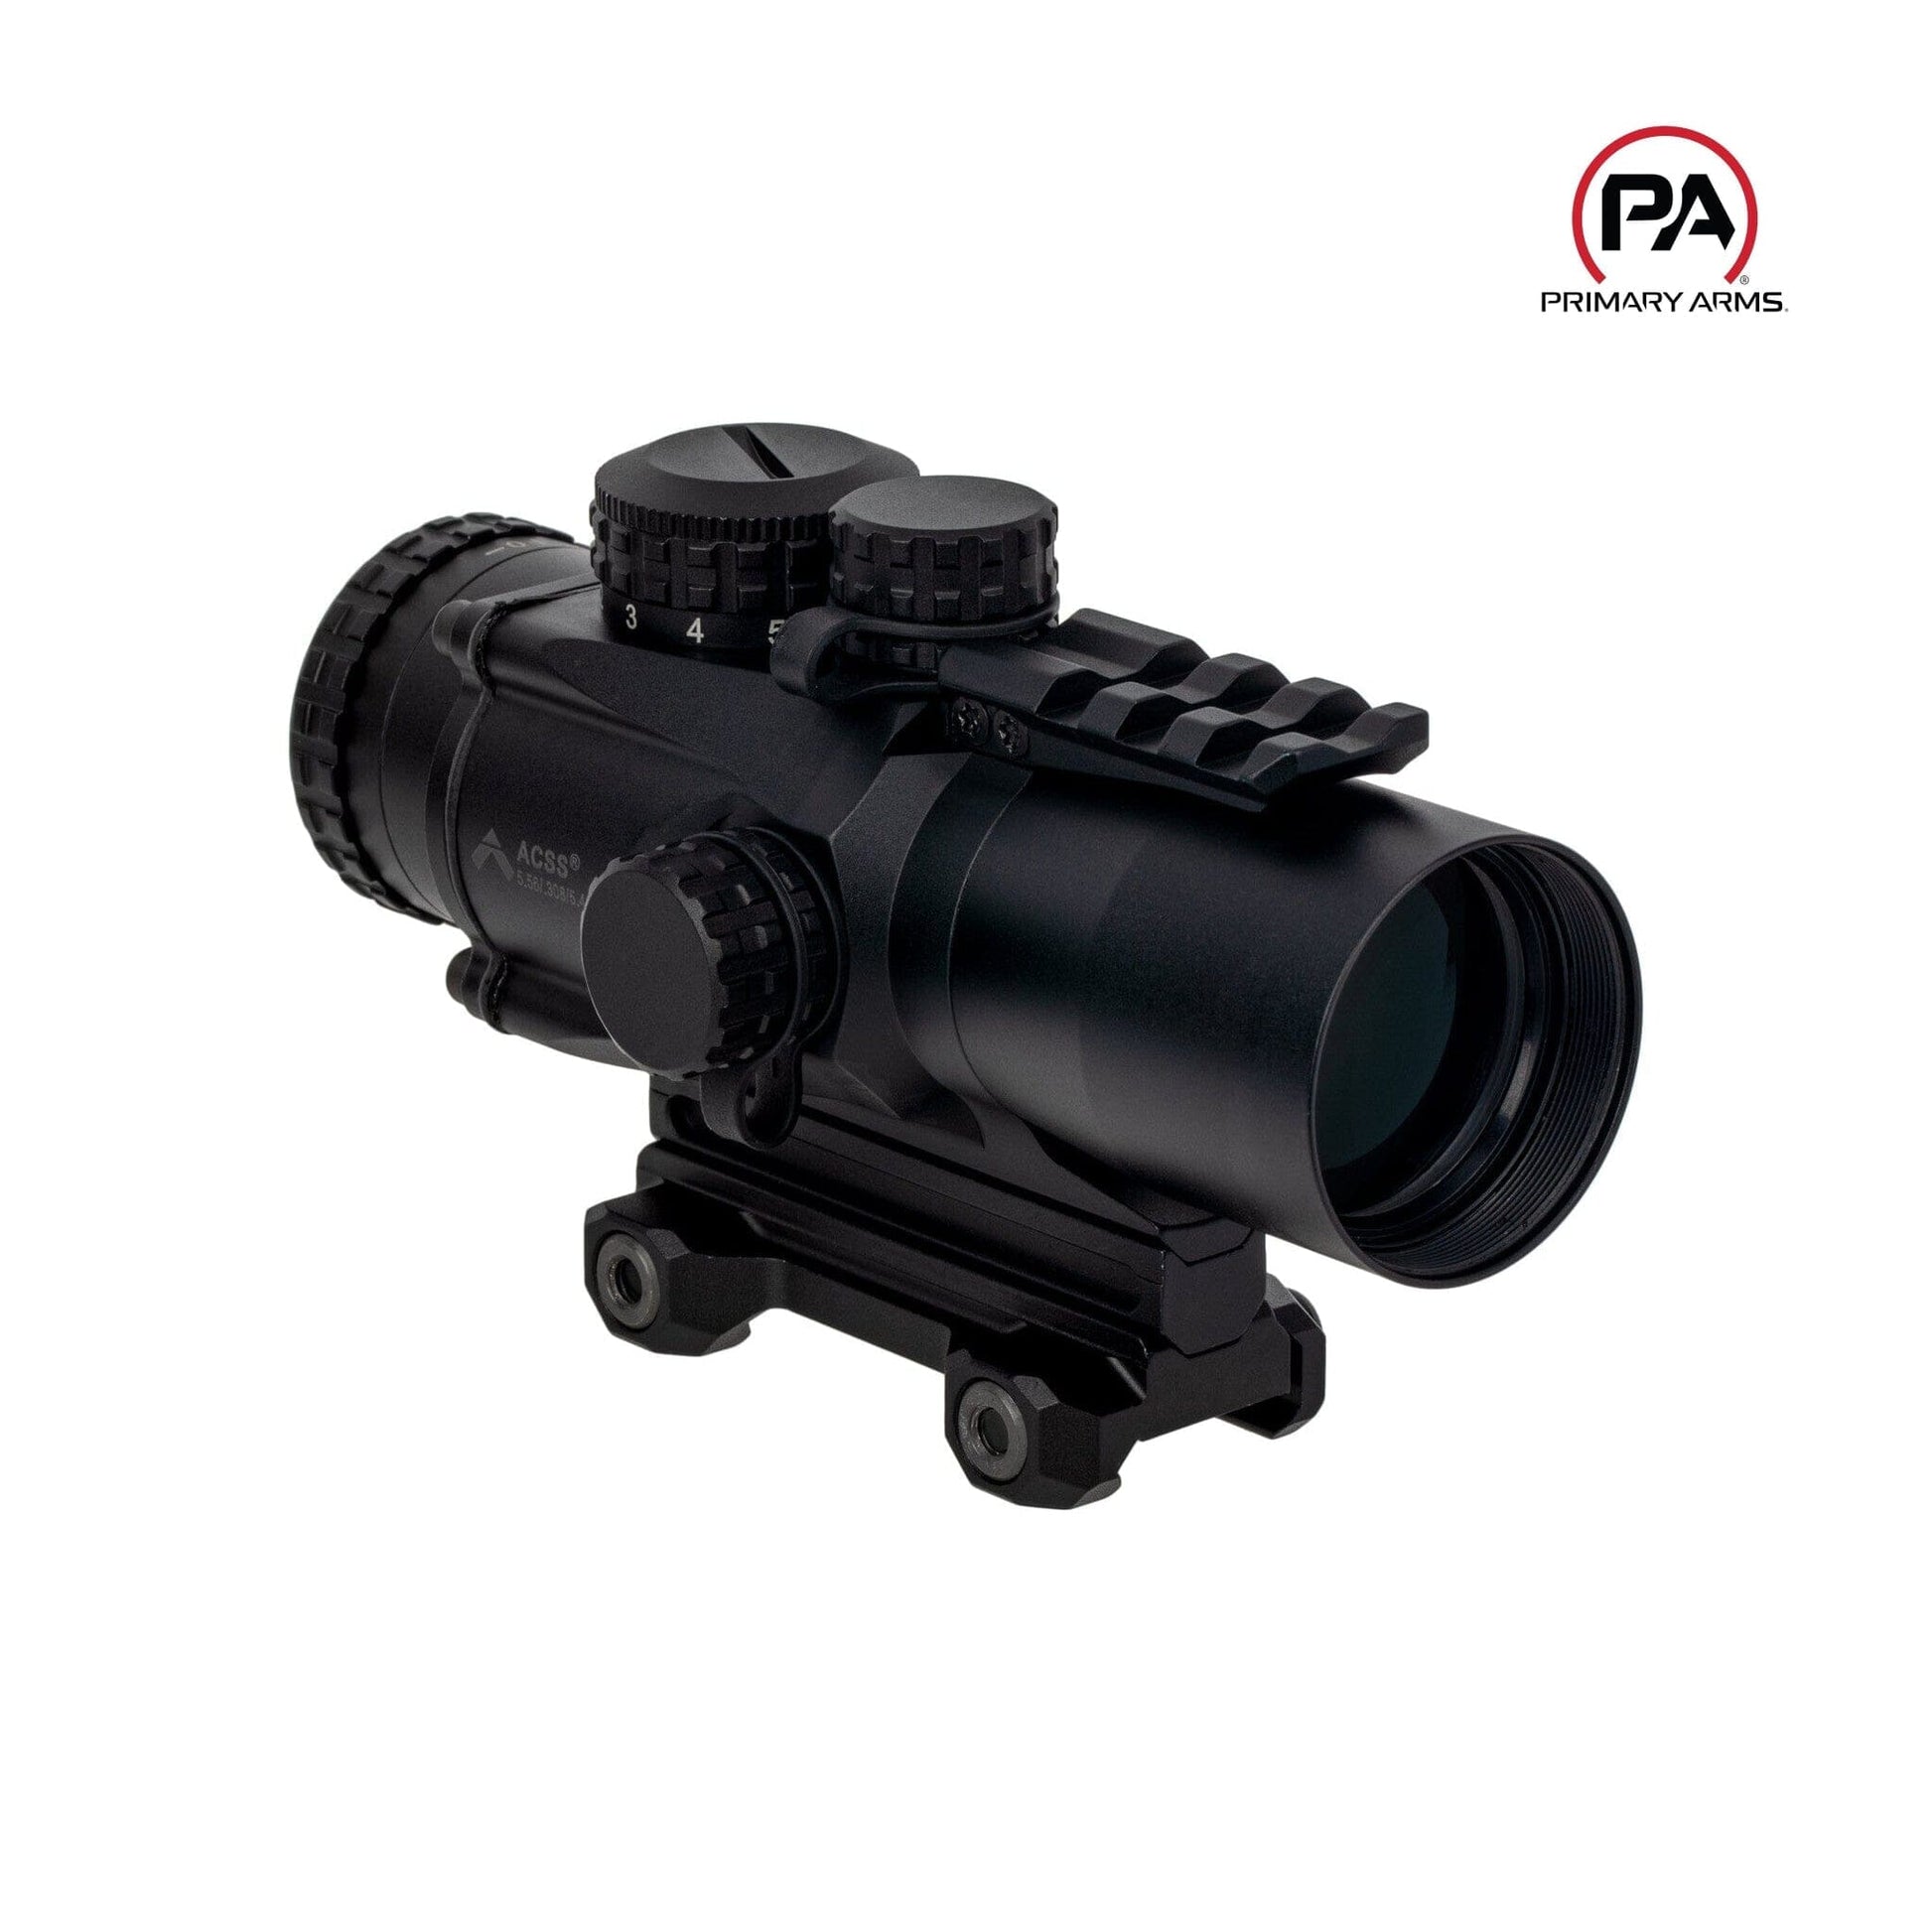 Primary Arms SLx 5x36mm Prism Scope Gen III - ACSS 5.56/5.45/.308 Reticle Prism Rifle Scope Primary Arms 